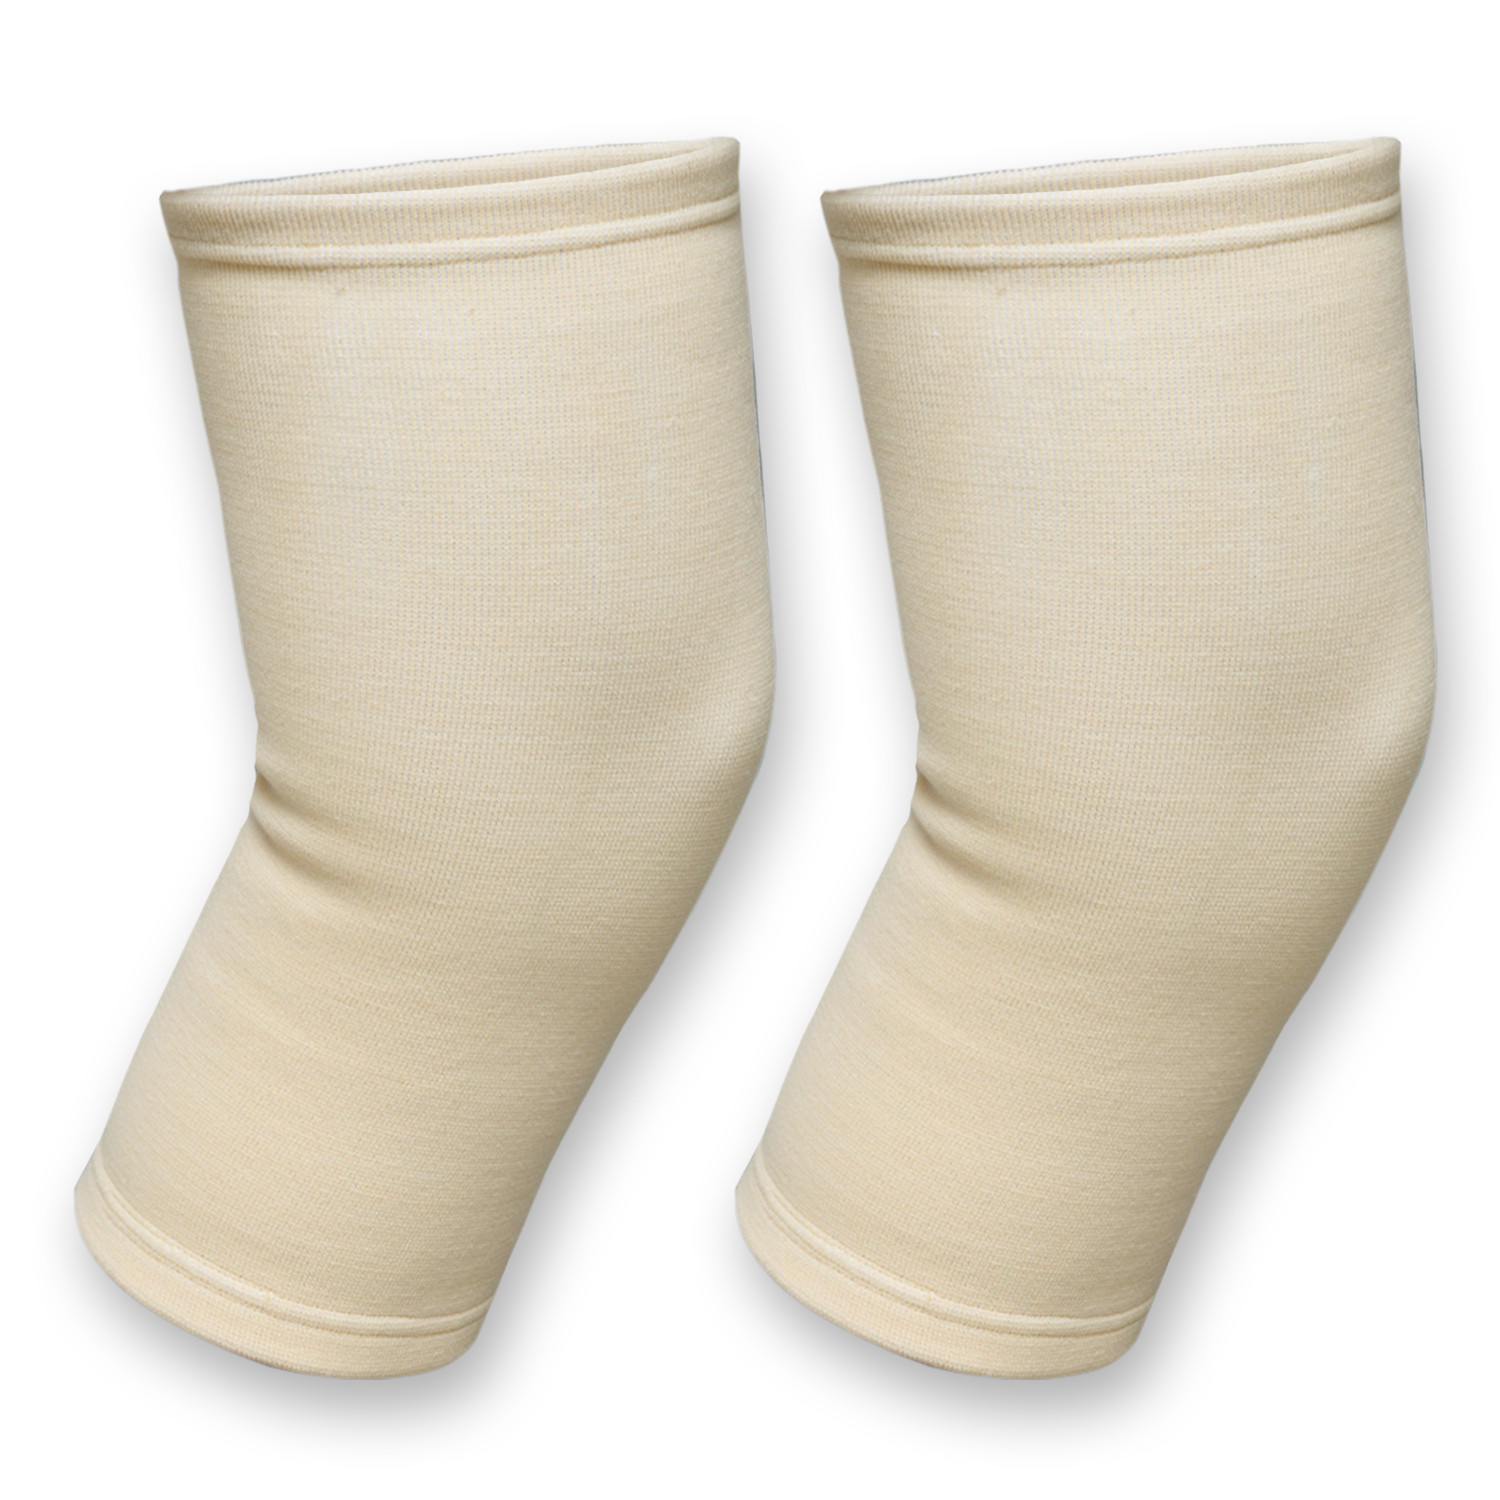 Kuber Industries Knee Cap | Cotton 4 Way Compression Knee Sleeves |Sleeves For Joint Pain | Sleeves For Arthritis Relief | Unisex Knee Wraps | Knee Bands |Size-XXL|1 Pair|Cream